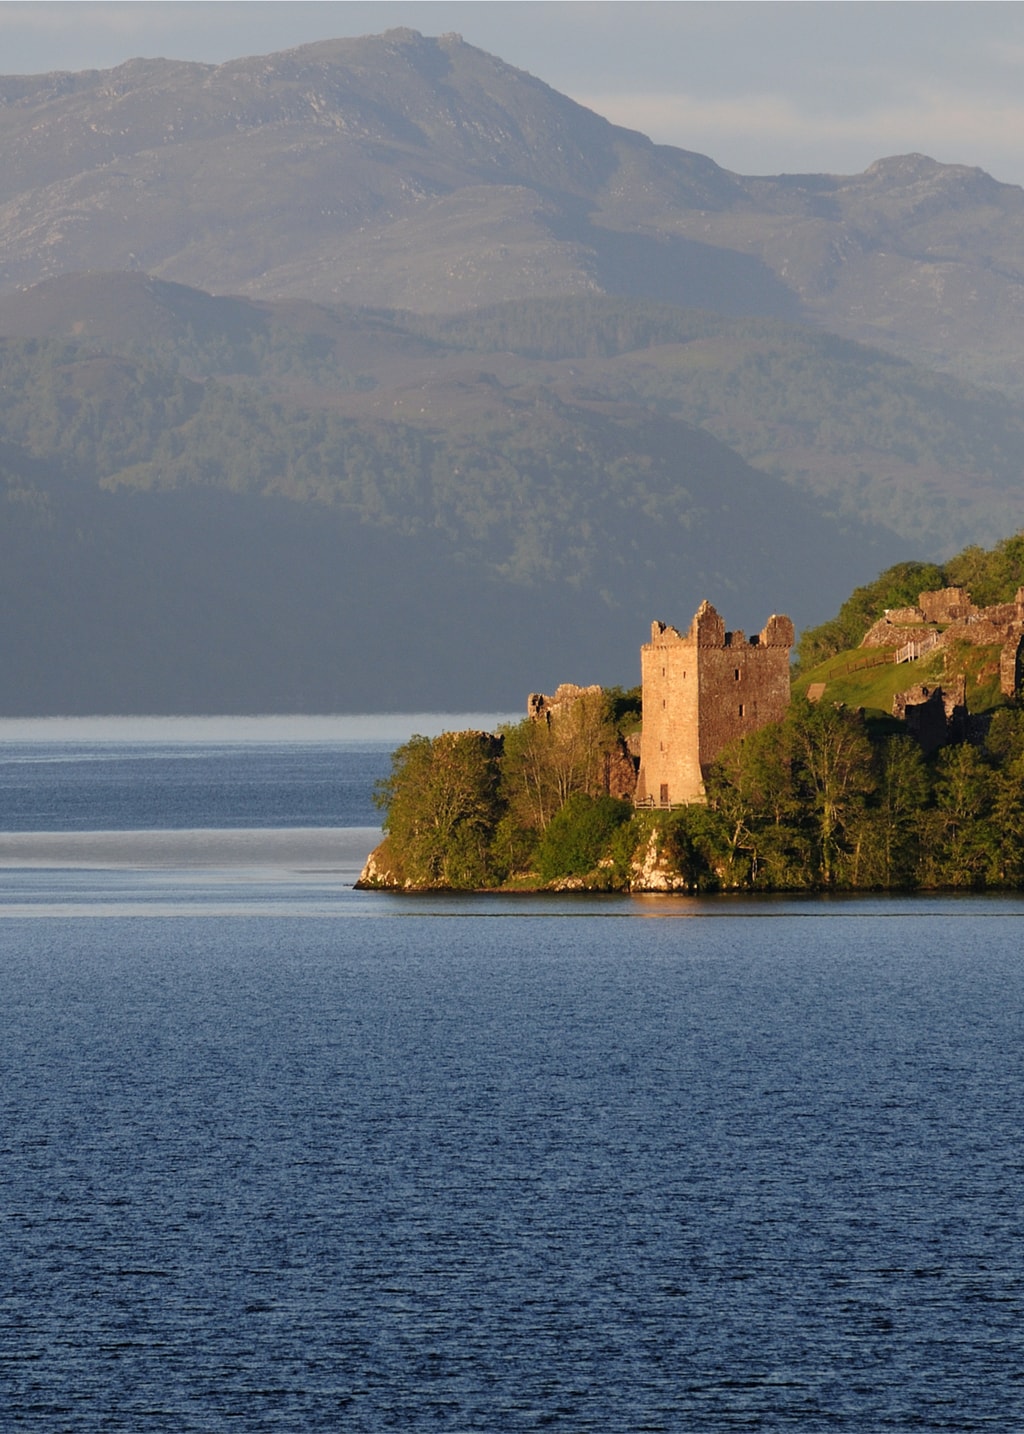 The ruins of the Urquhart Castle situated on the Loch Ness in Scotland